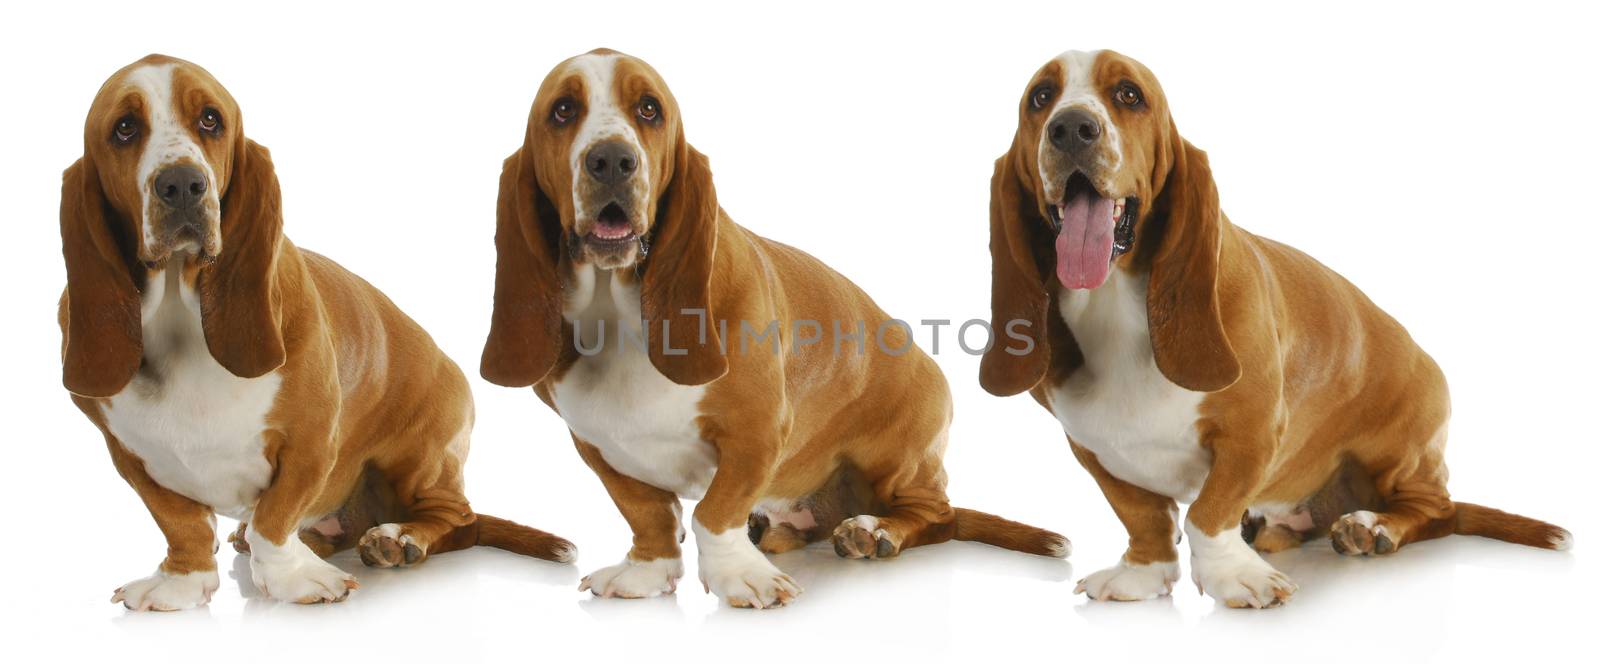 basset hound  by willeecole123